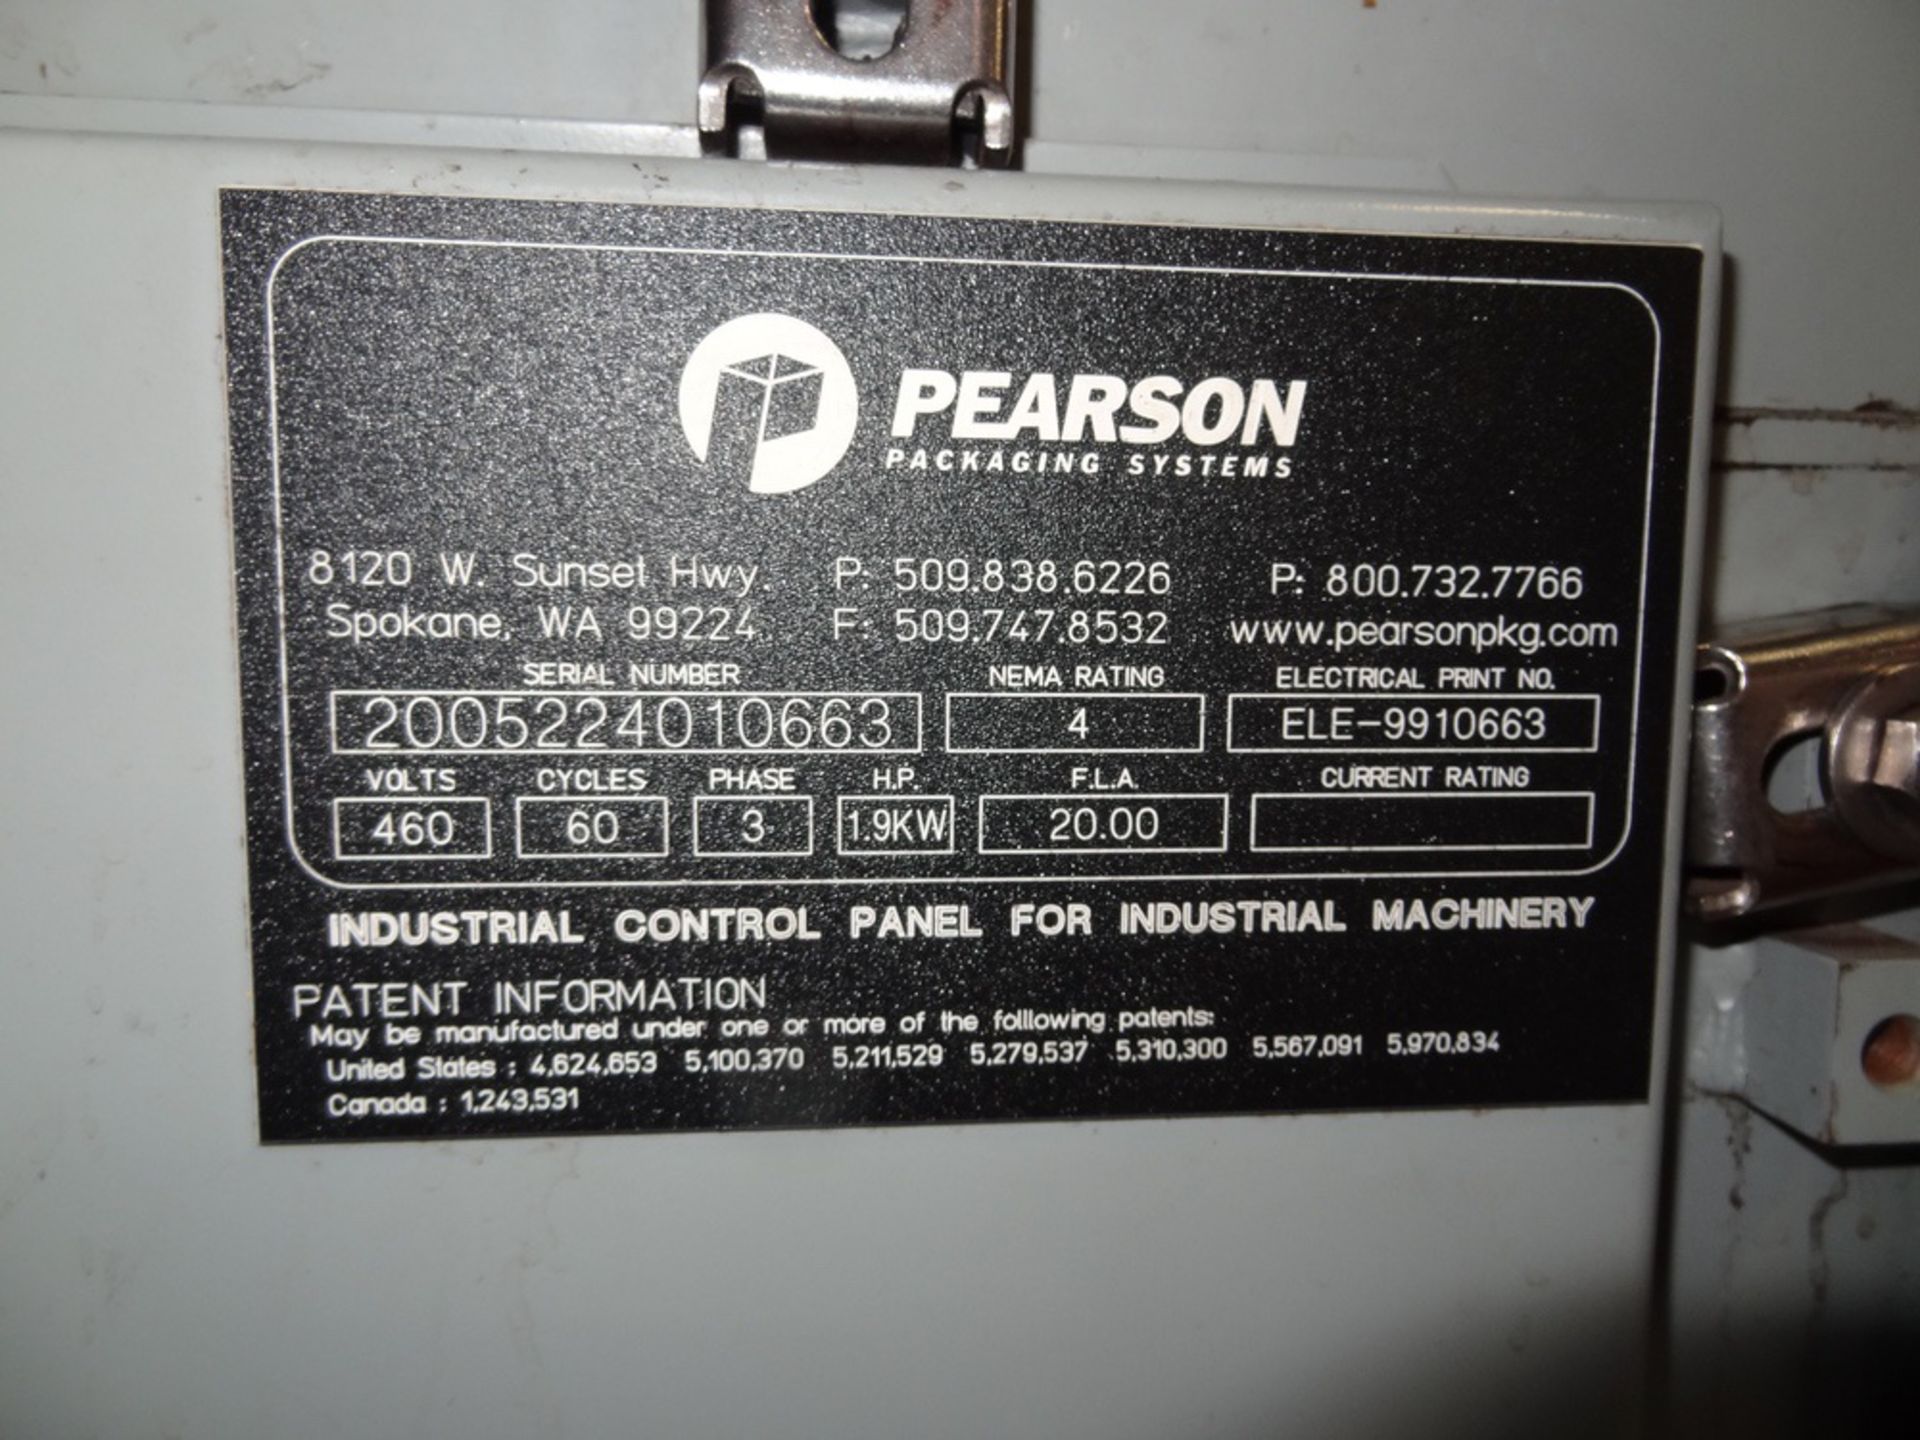 2004 RA Pearson Model 2240 12-Pack Gluer, Includes Nordson Problue 15 | Subject to Bulk Bid Lot #1 - Image 4 of 4